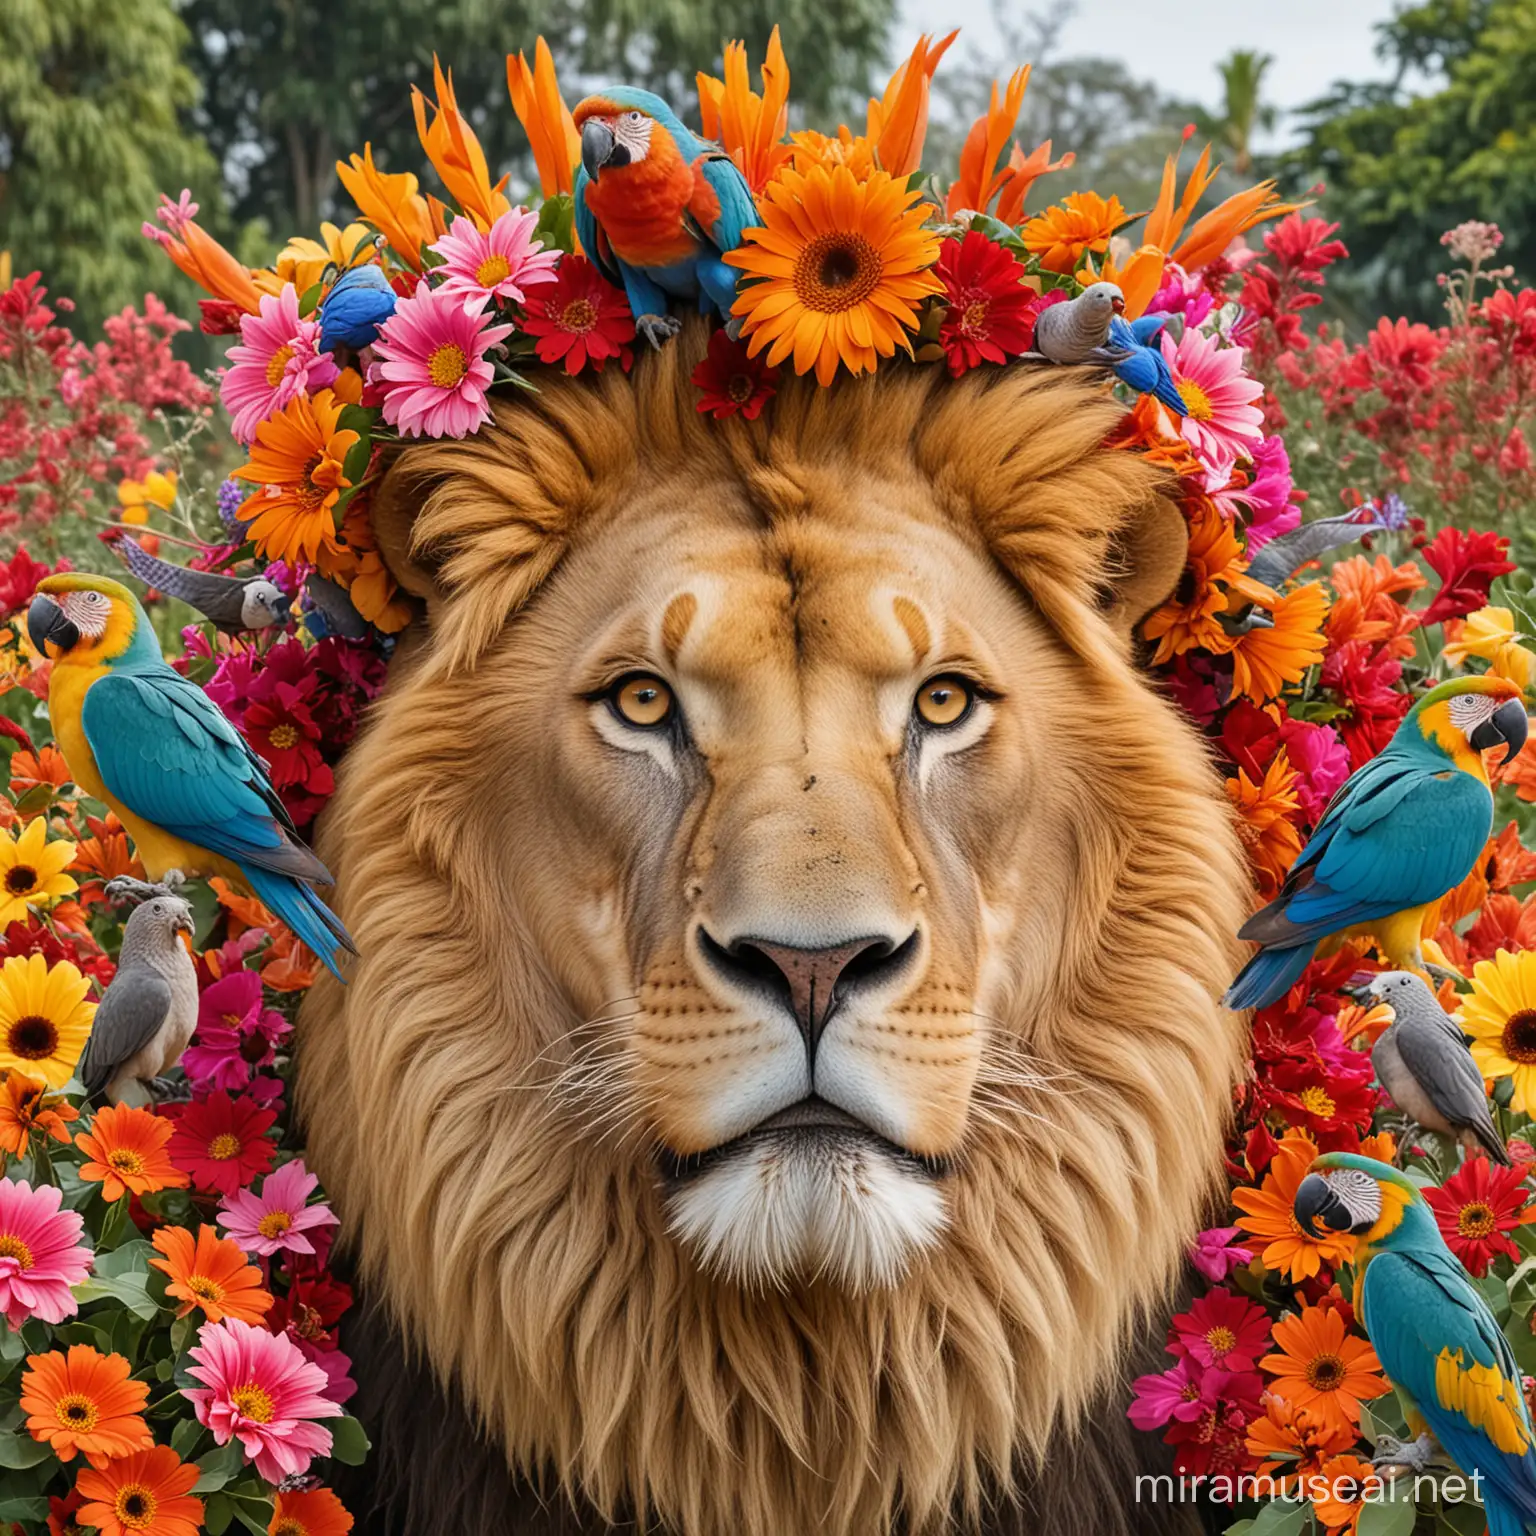 Majestic Lion Surrounded by Vibrant Flowers and Parrots